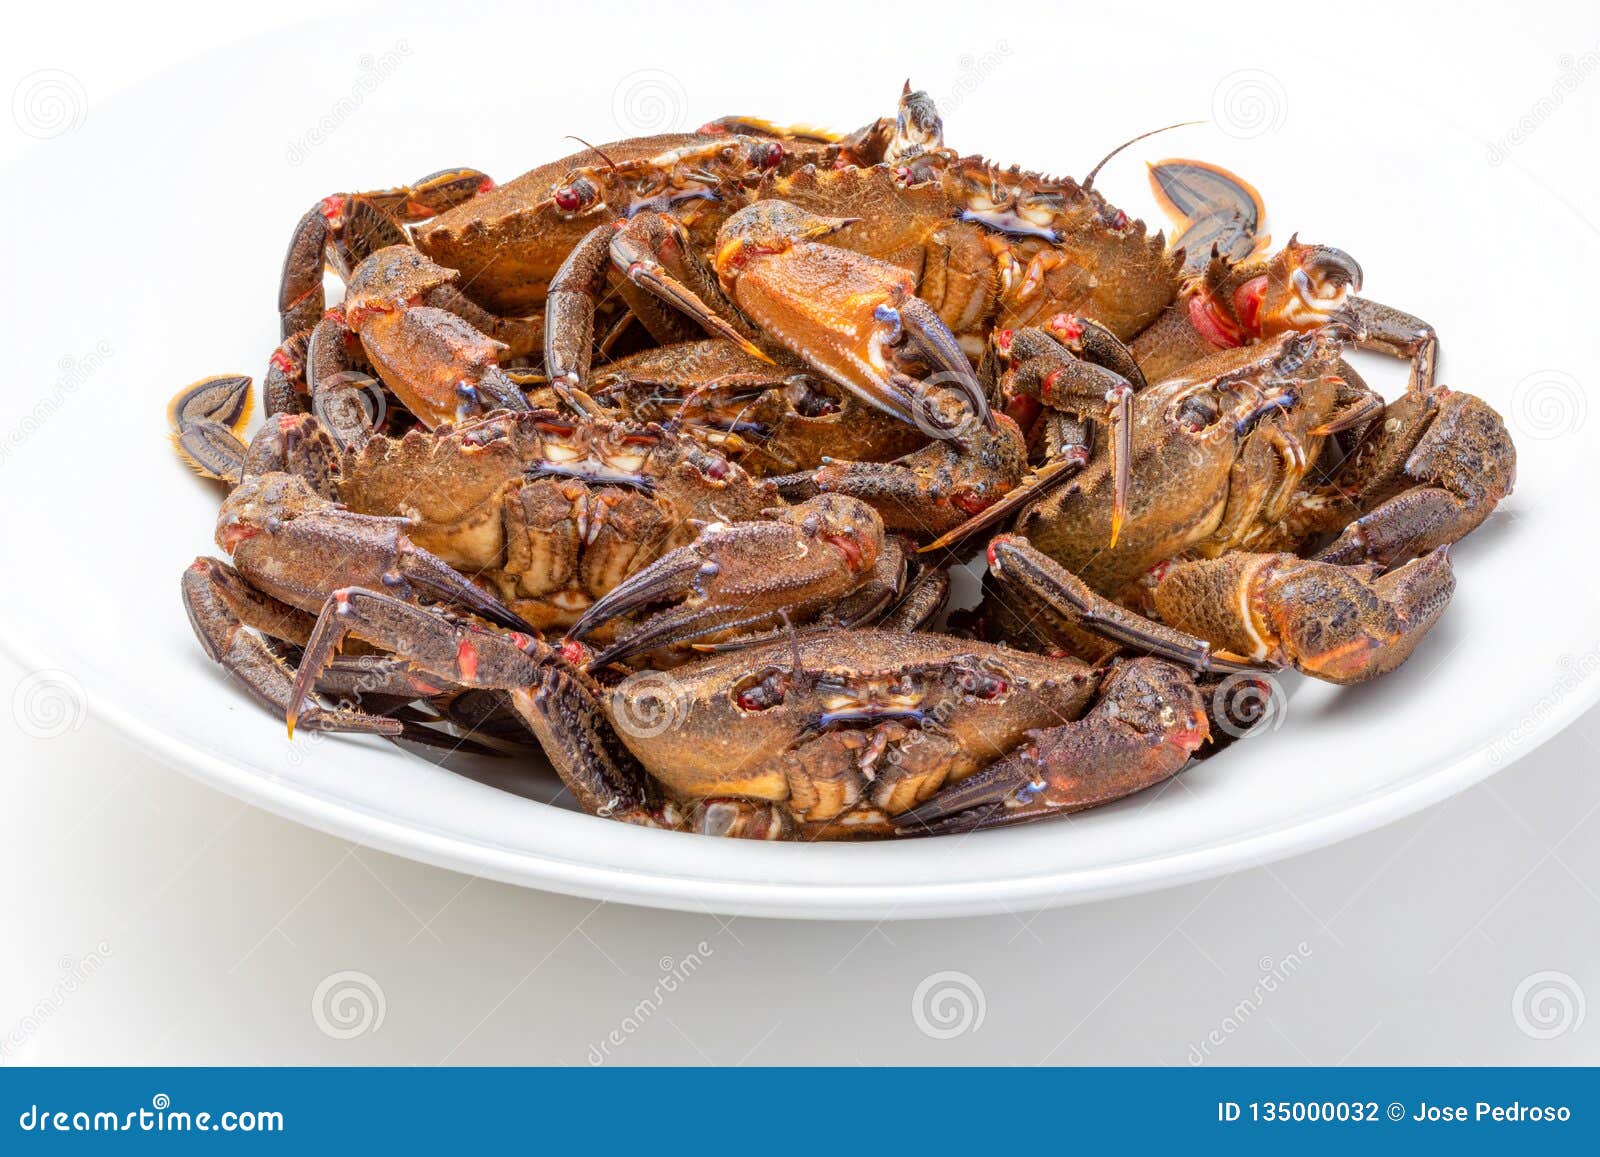 galician necoras from galicia. delicious seafood from the bay of biscay and atlantic.